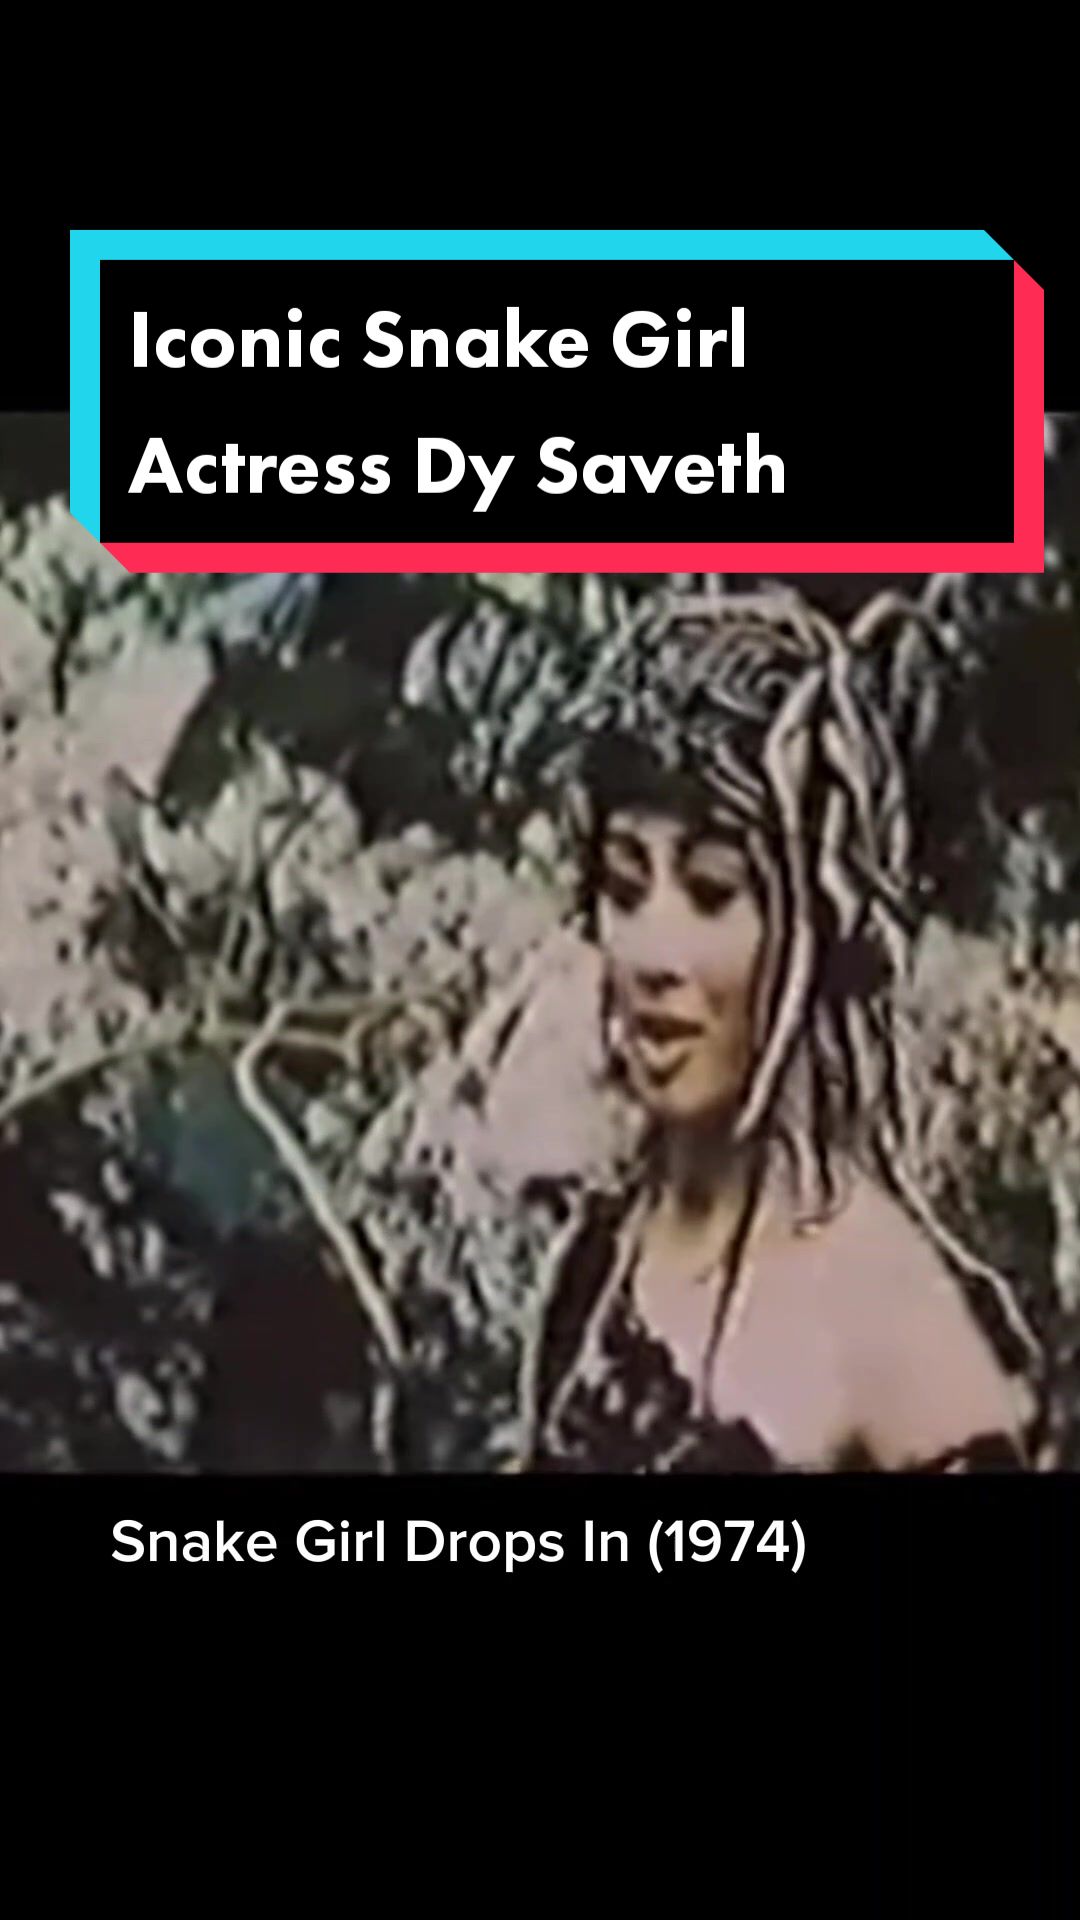 Do you know the Cambodian Actress Dy Saveth? She is known as the iconic ...